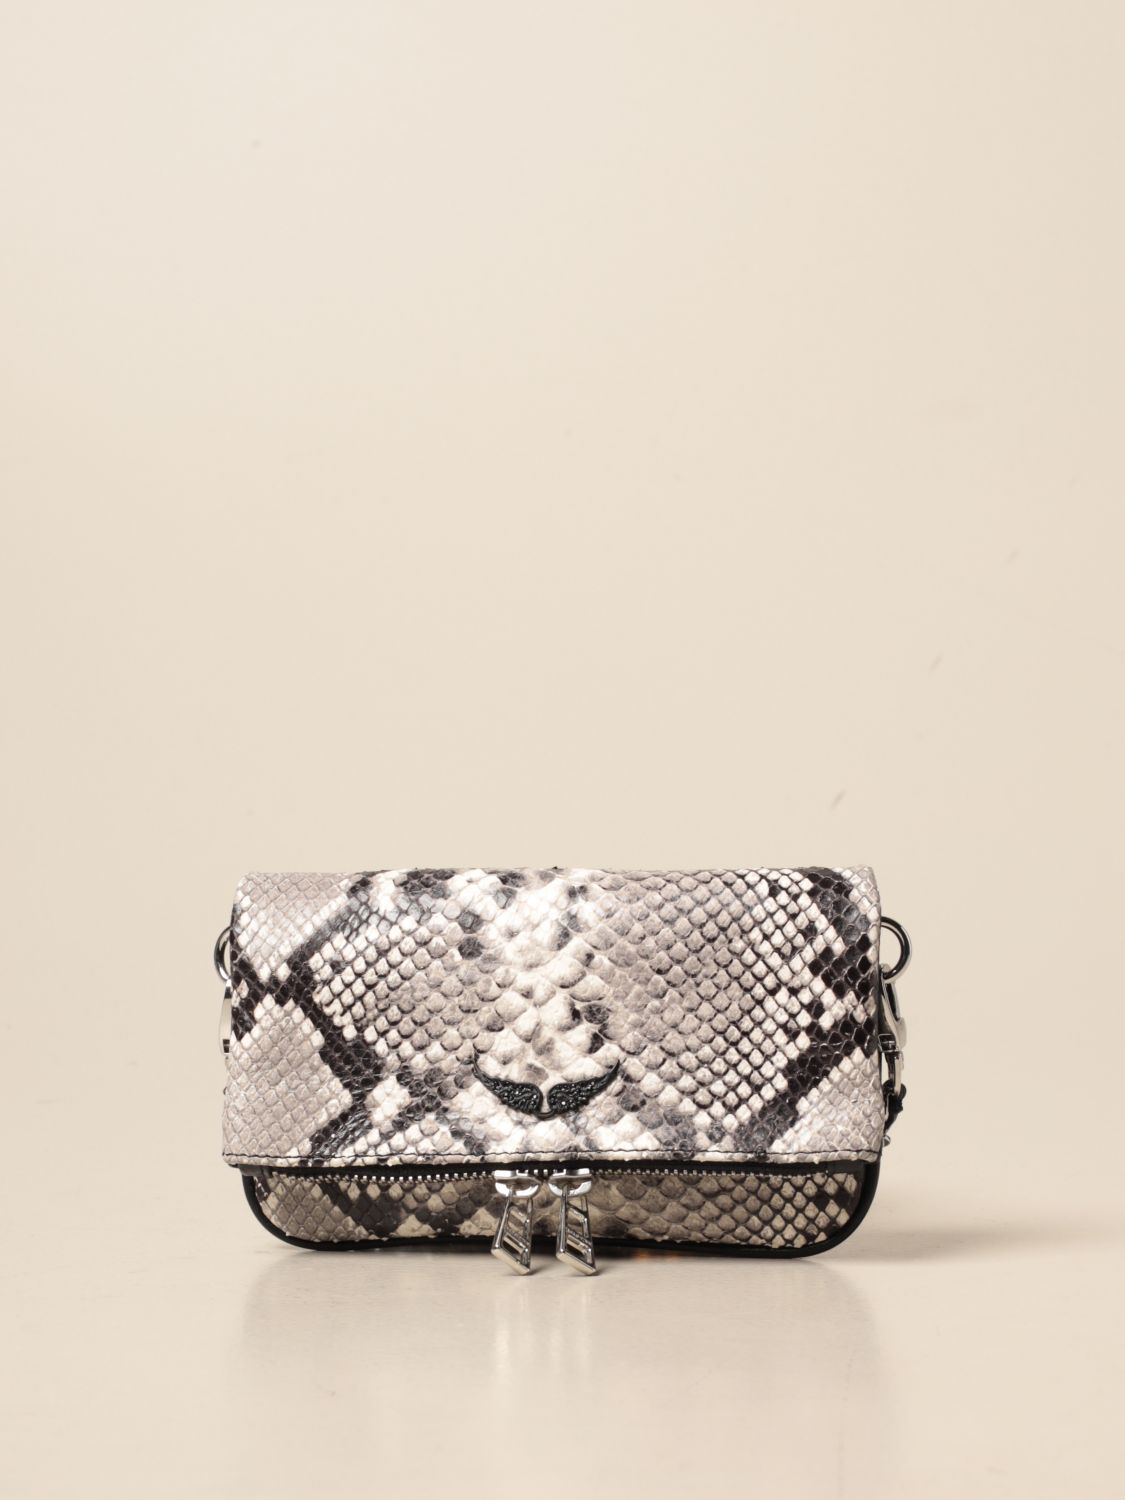 Rock nano bag Zadig & Voltaire in python print leather